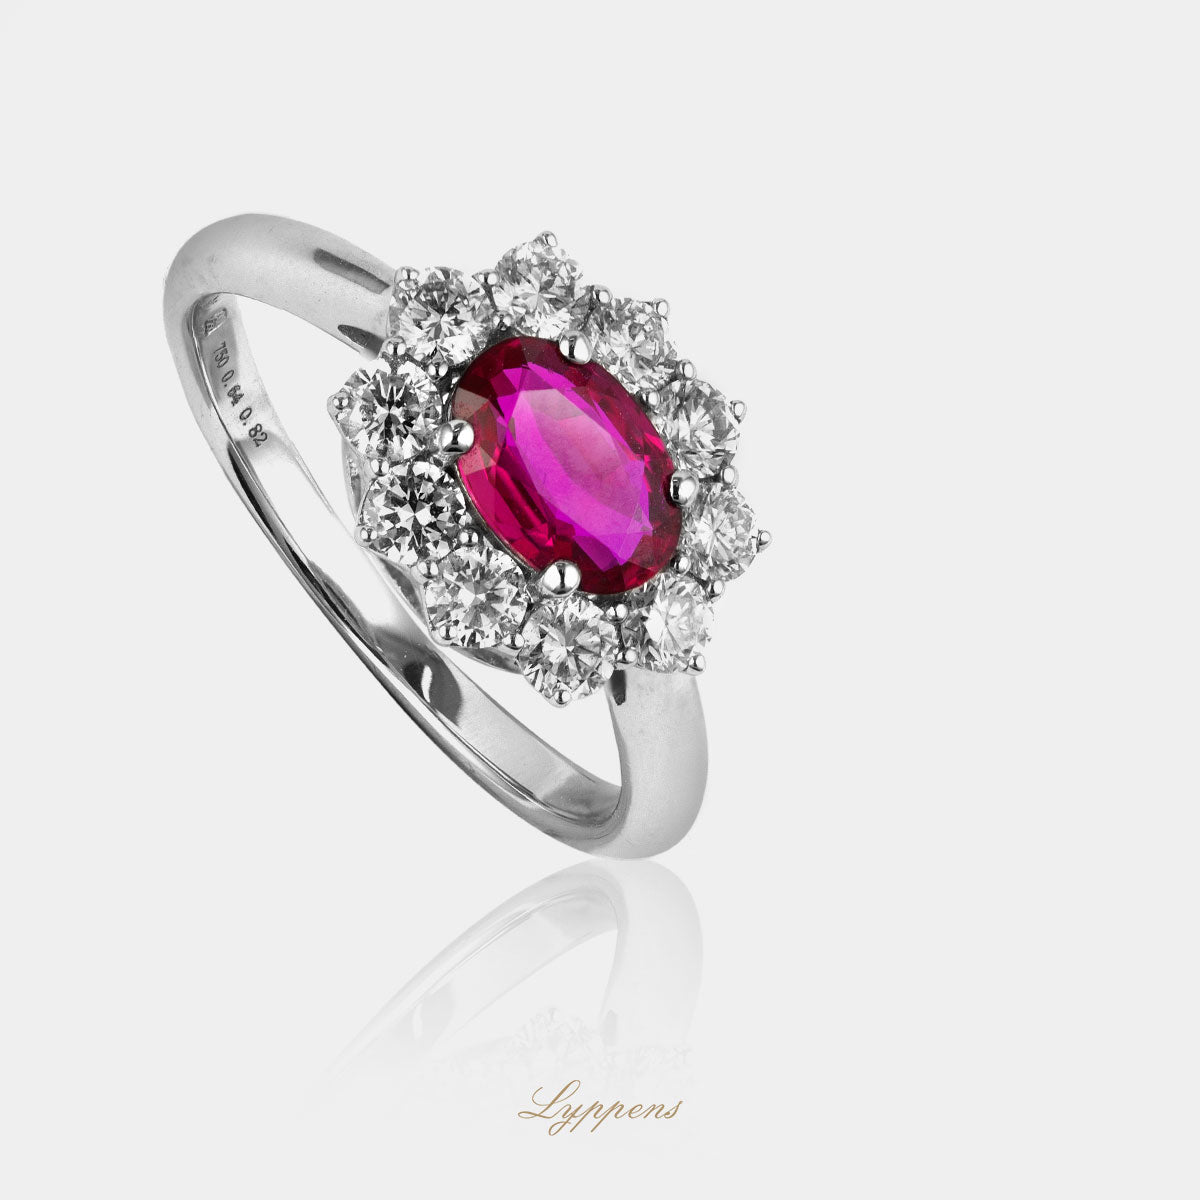 White gold entourage ring with ruby and diamonds